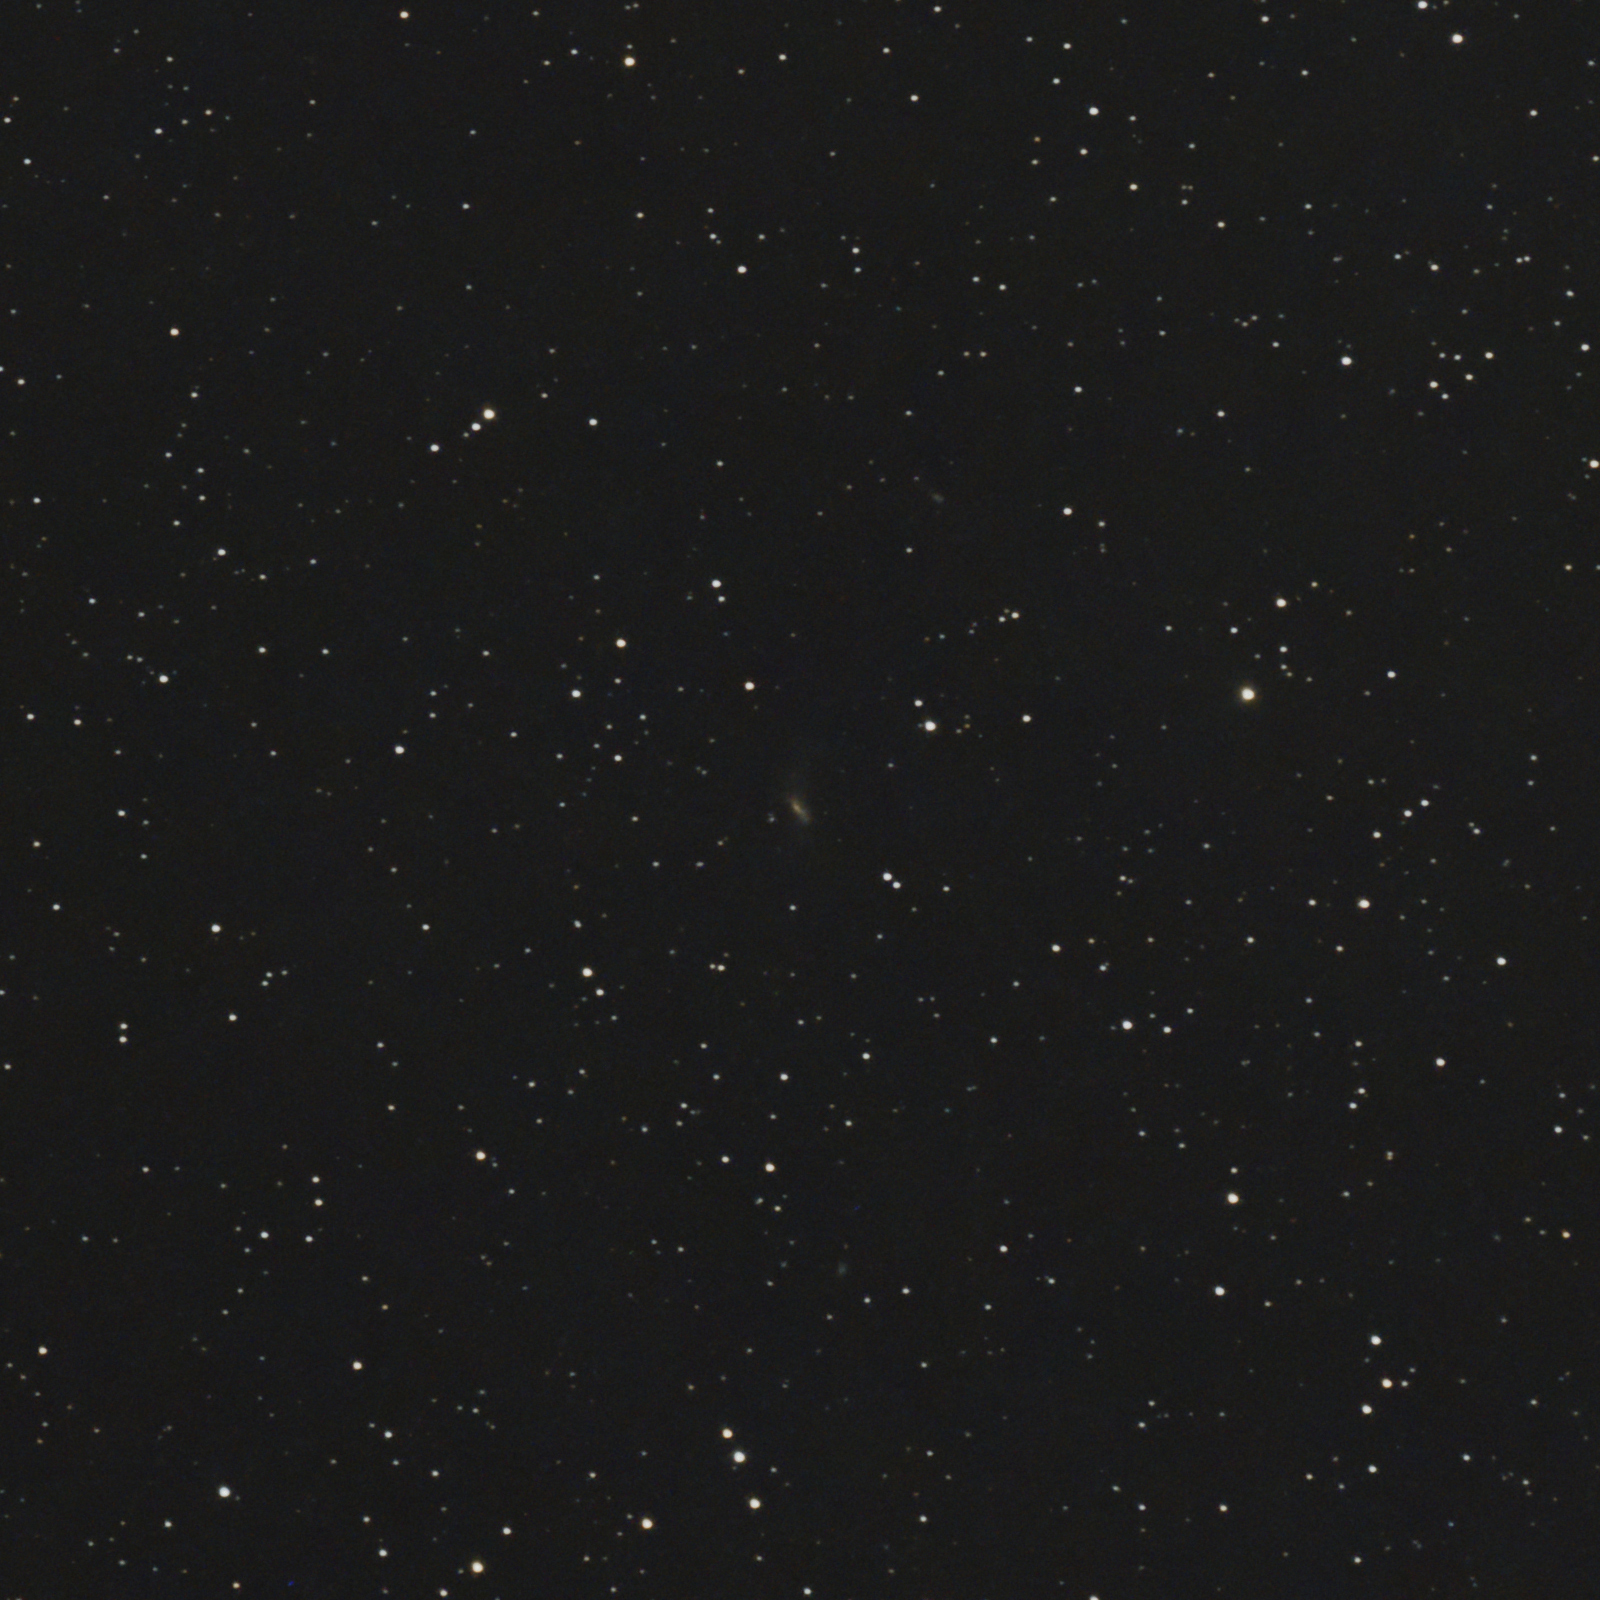 NGC660 M74 Crop acl200 2600 g120 br10 nofilter 20F APP PS23 11232022m